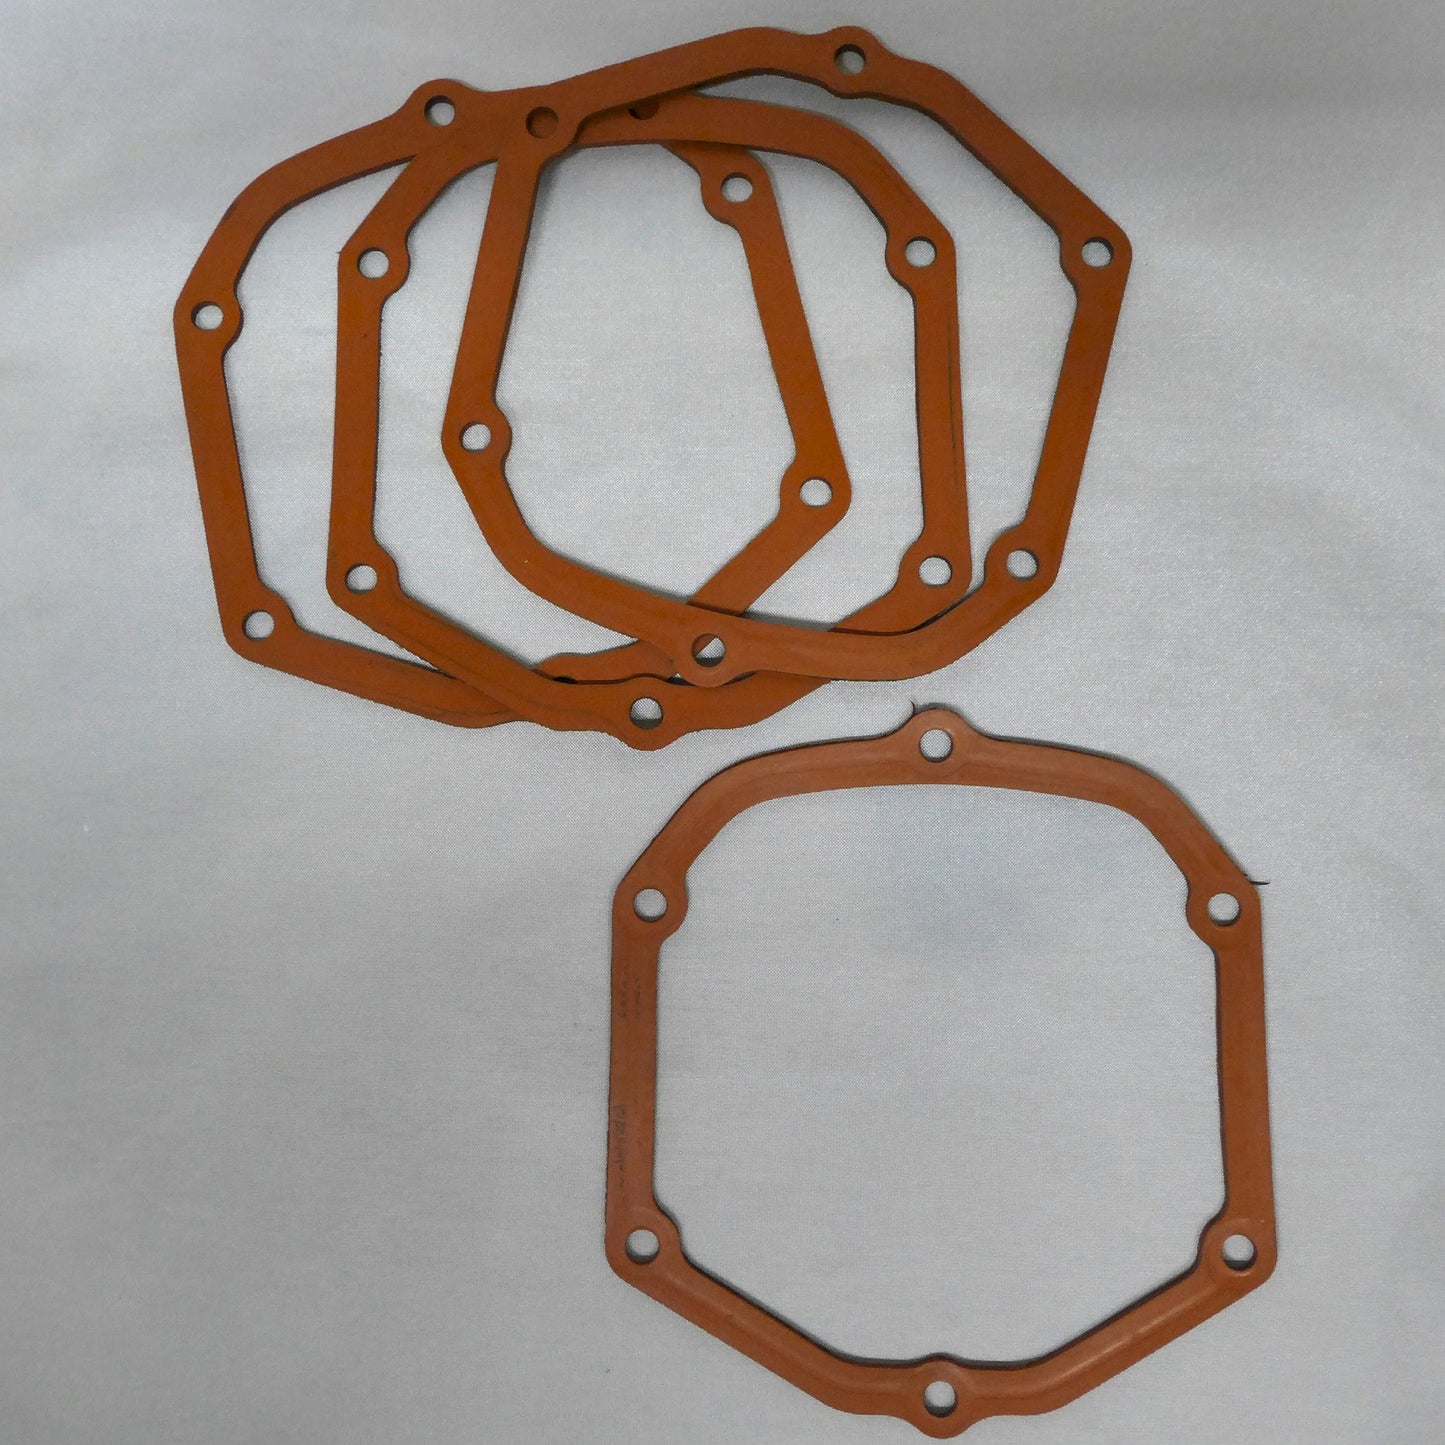 Lycoming Rocker Box Silicone Gasket - Set of 4 (A/R)